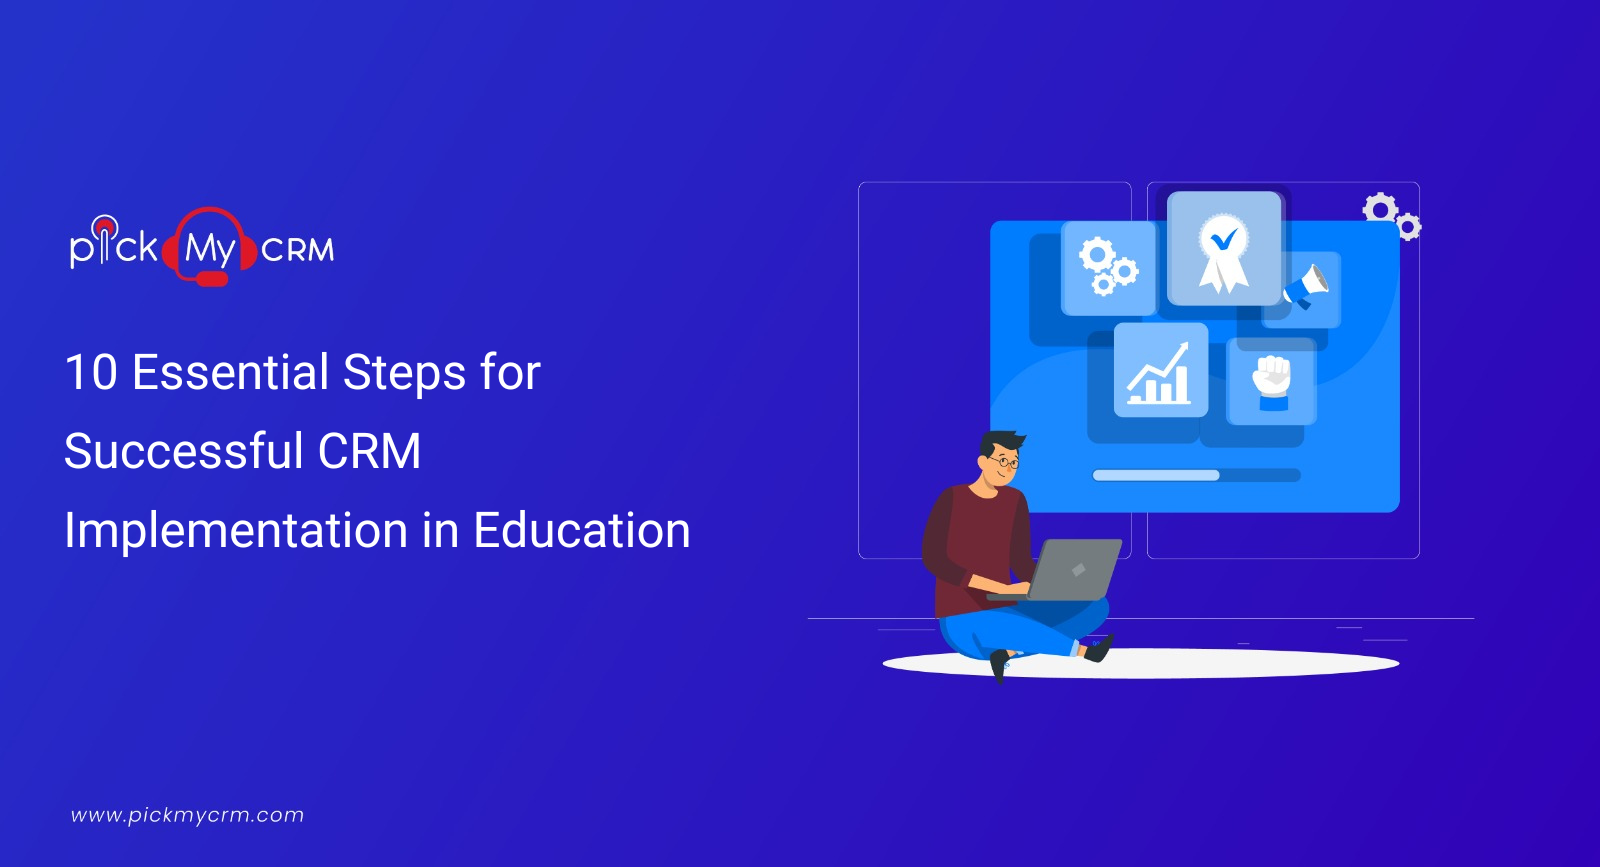 10 Essential Steps for Successful CRM Implementation in Education